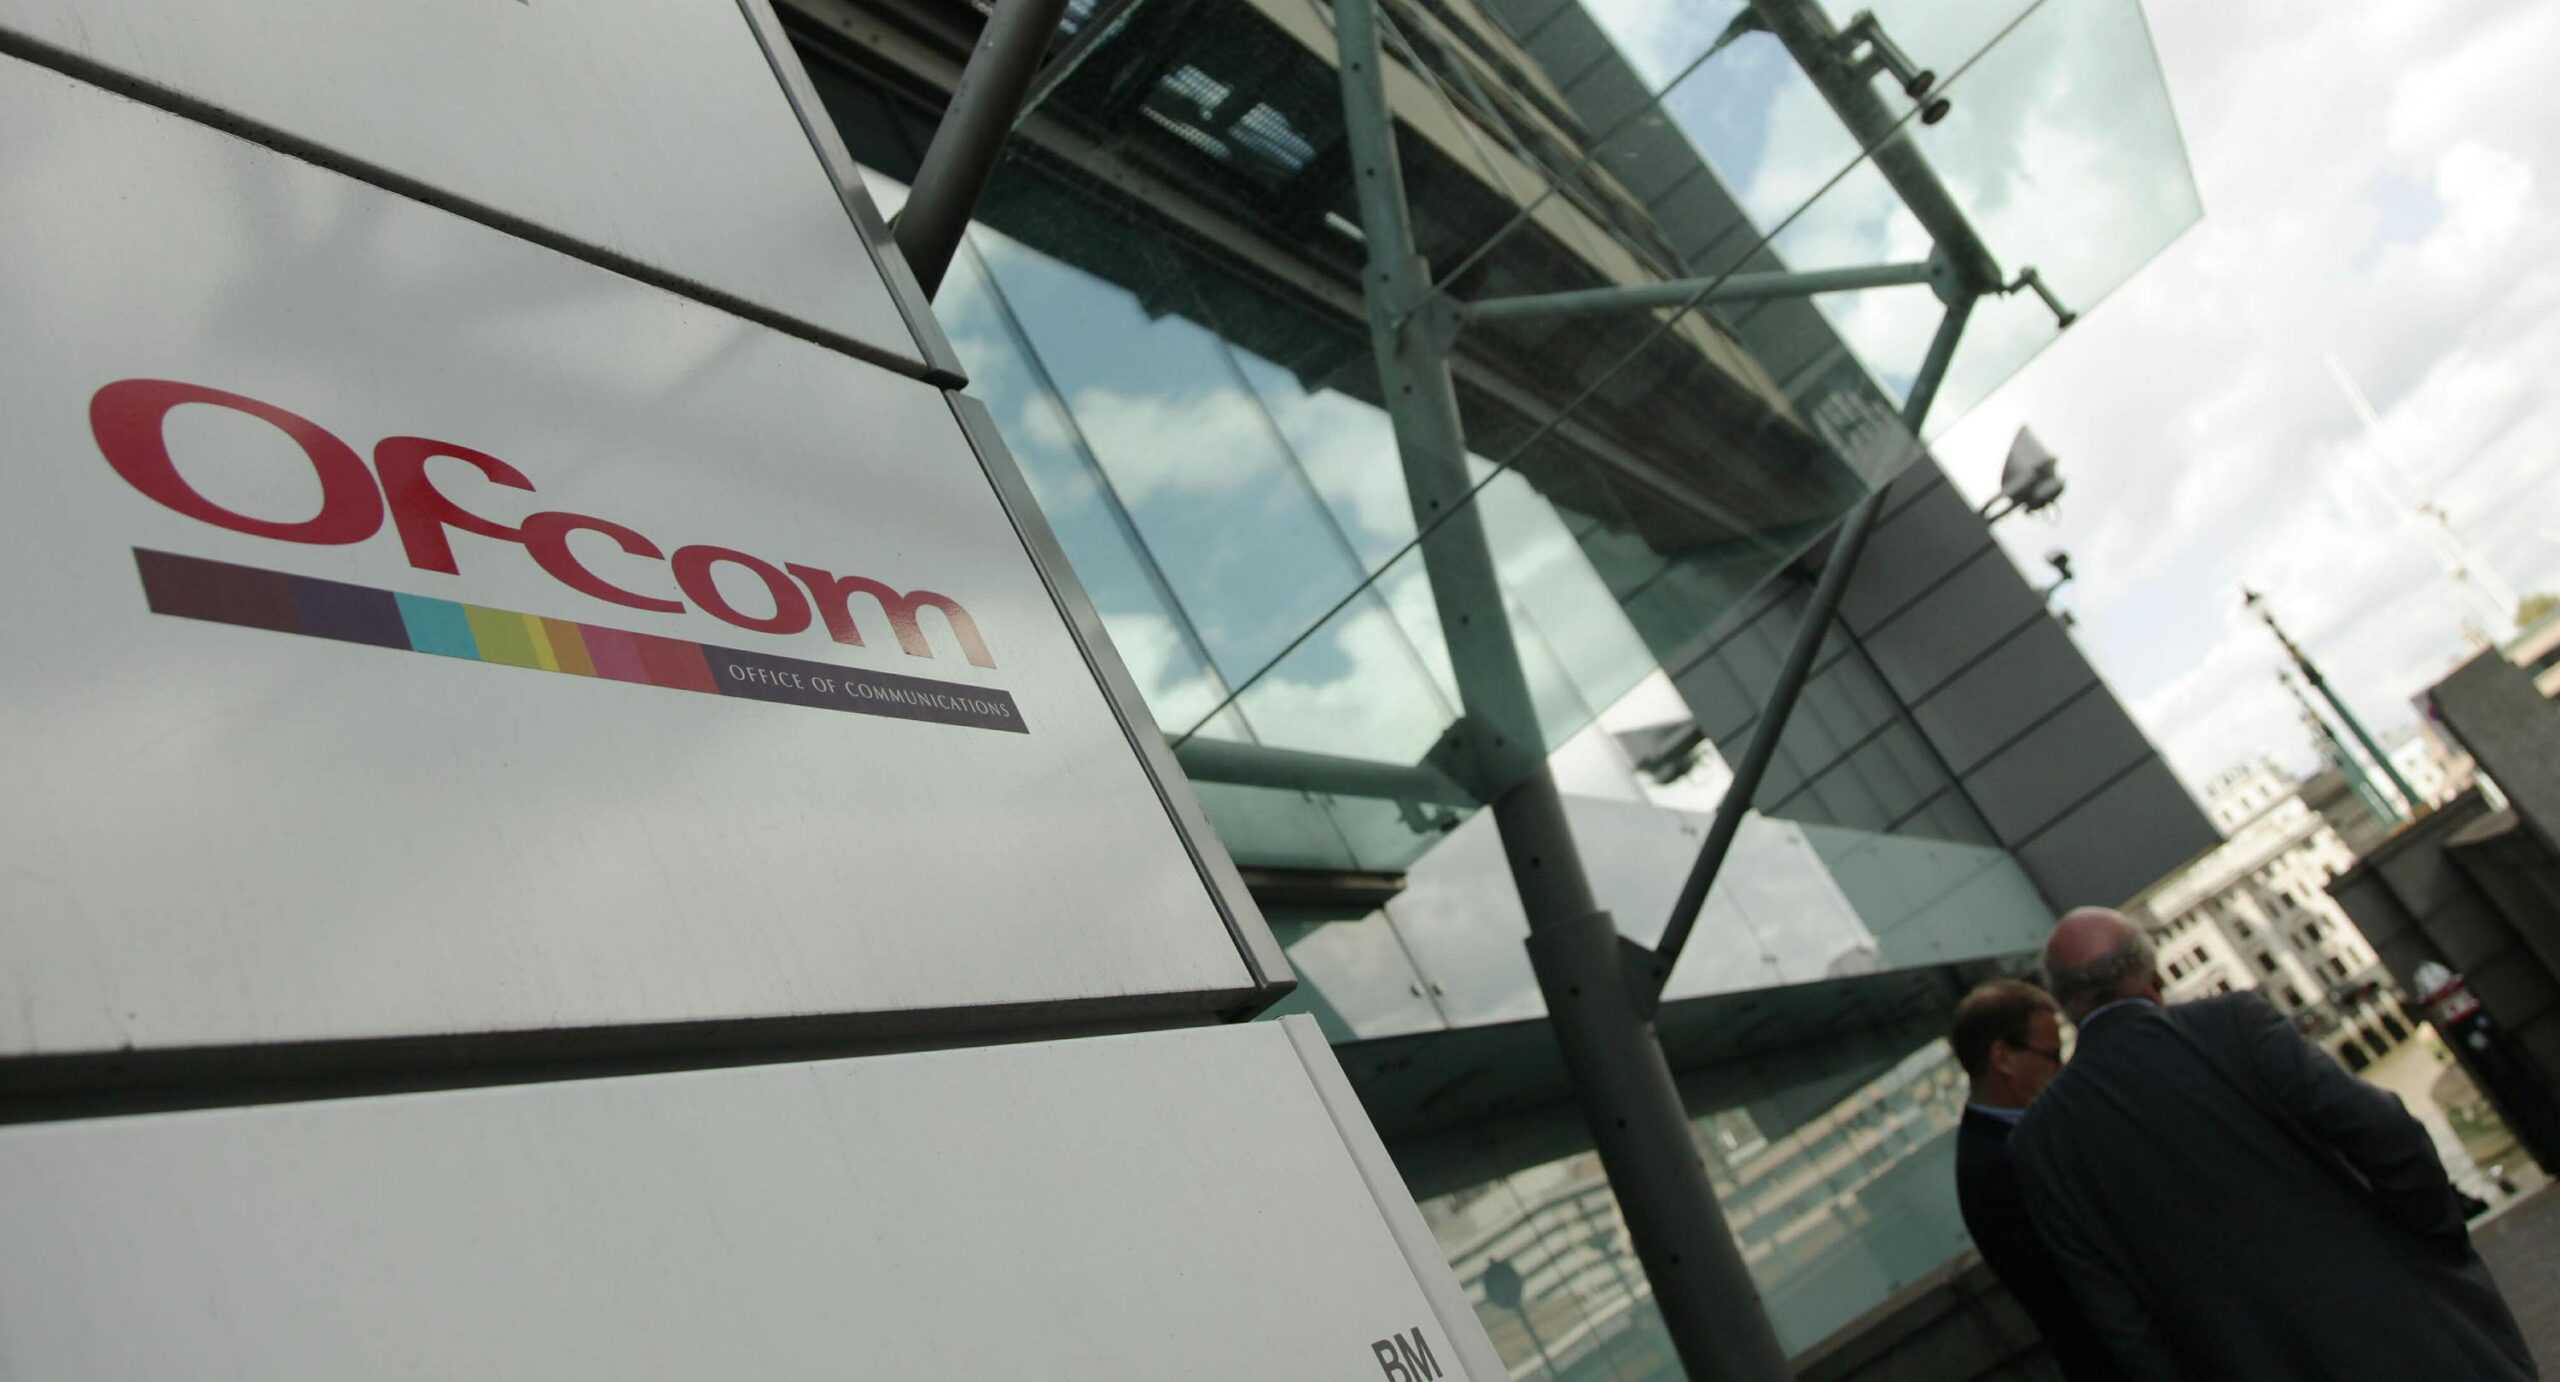 Ofcom rules GB News show breached due impartiality rules